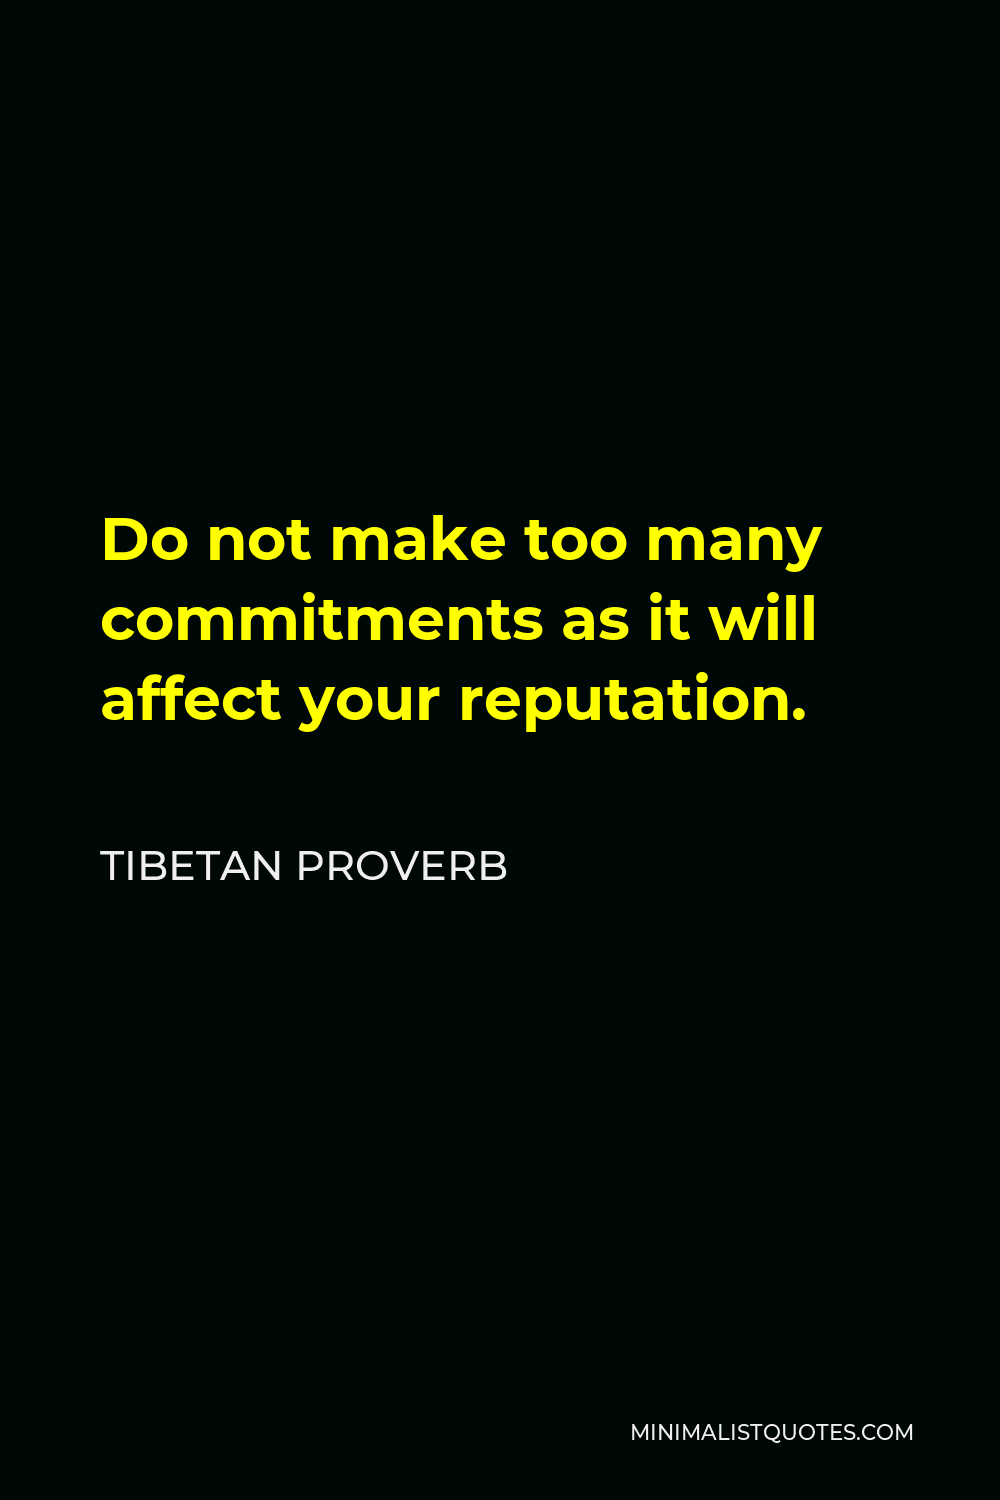 Tibetan Proverb Quote - Do not make too many commitments as it will affect your reputation.